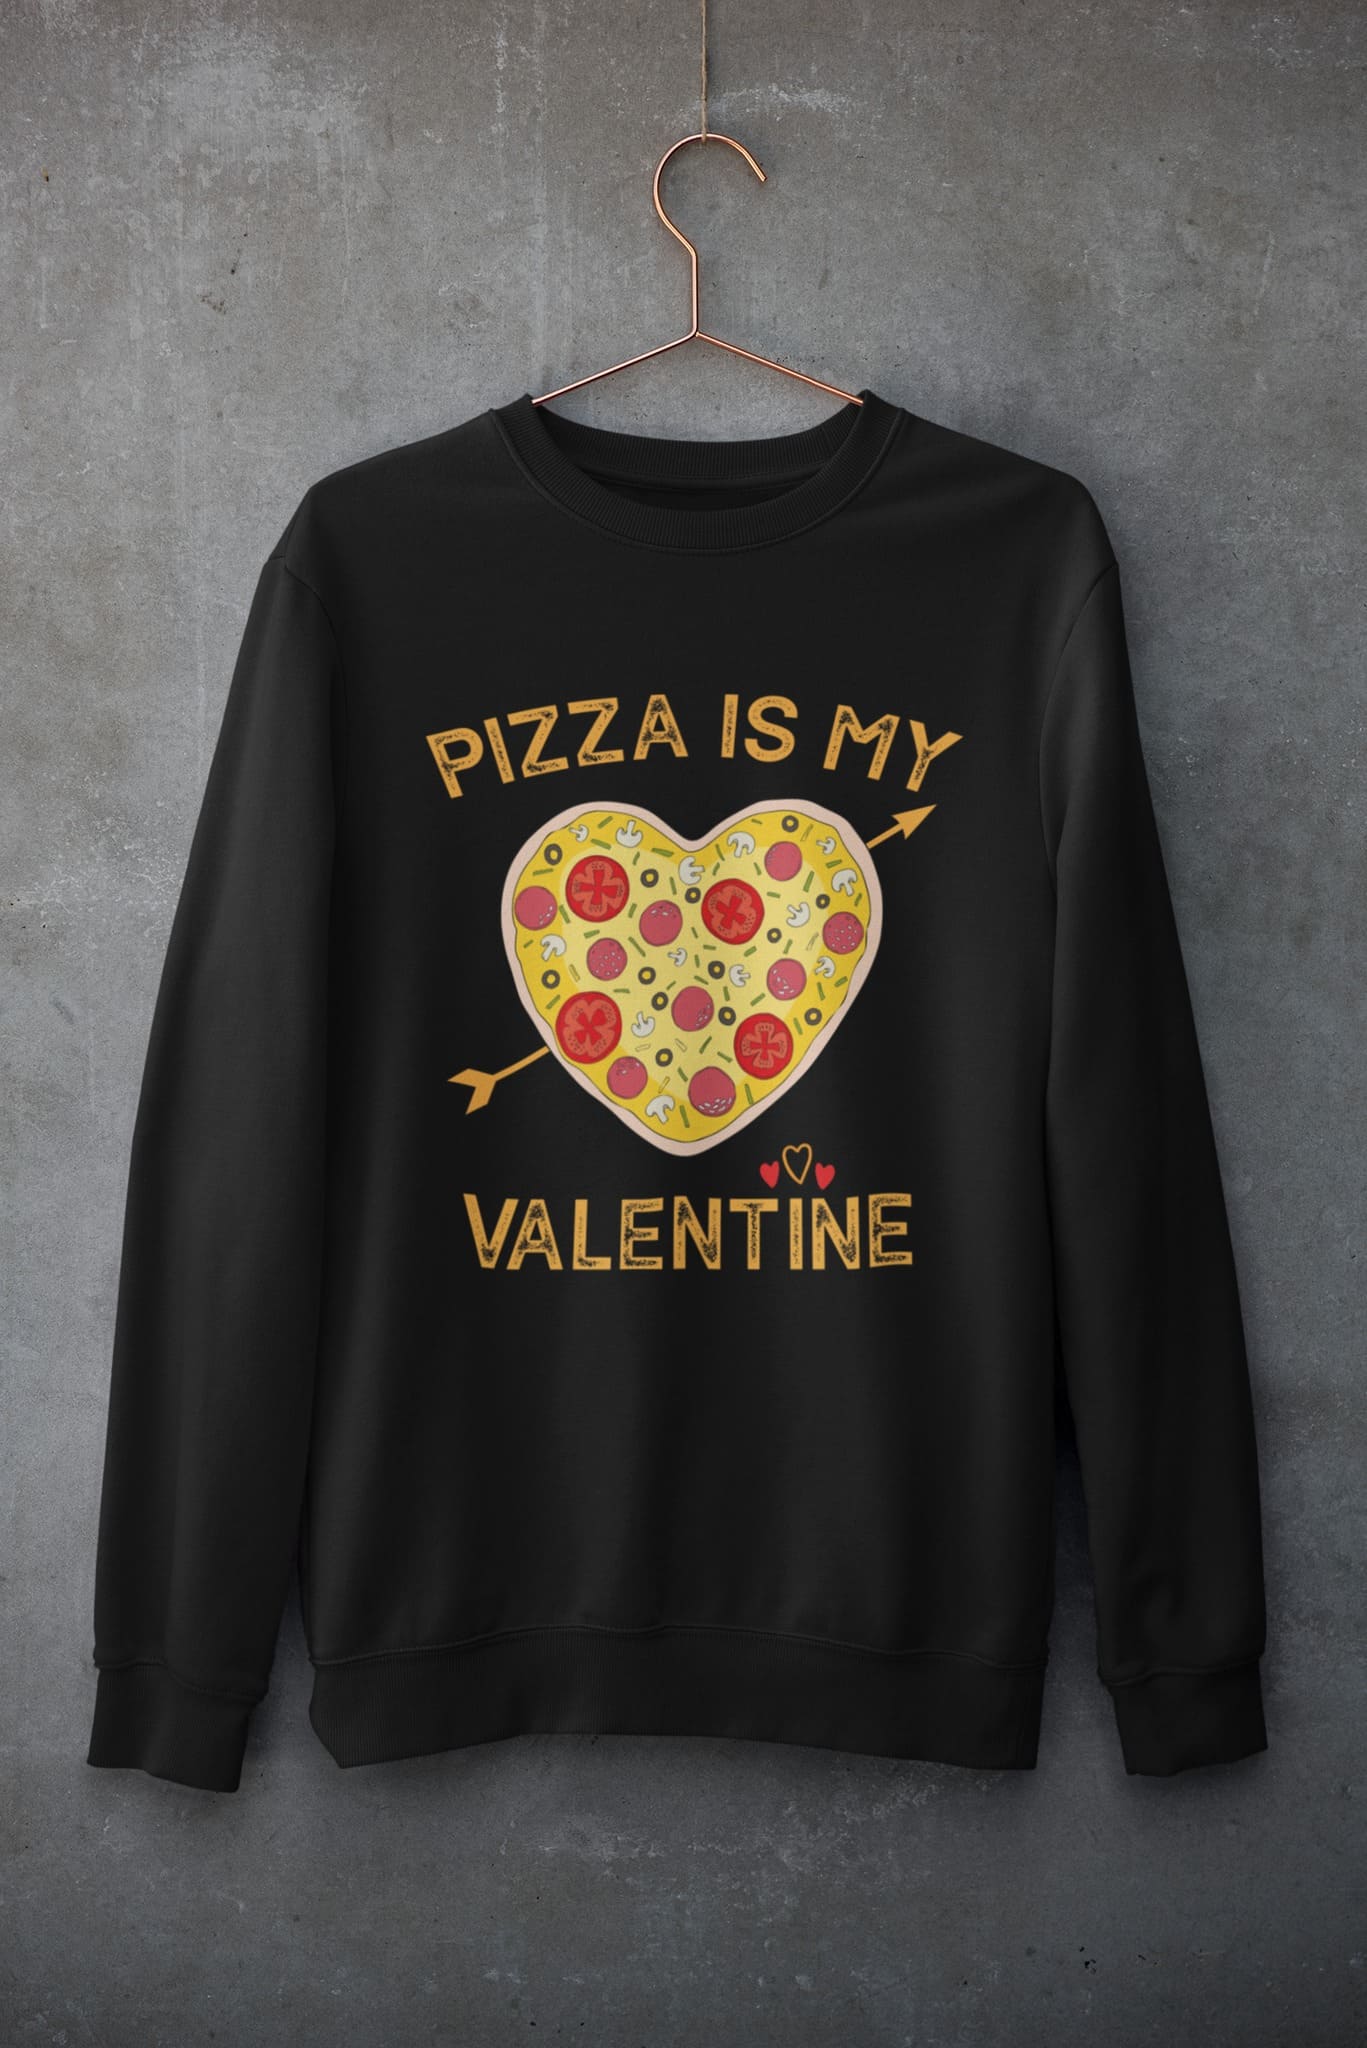 Pizza is my valentine - Gift for valentine day, pizza for valentine